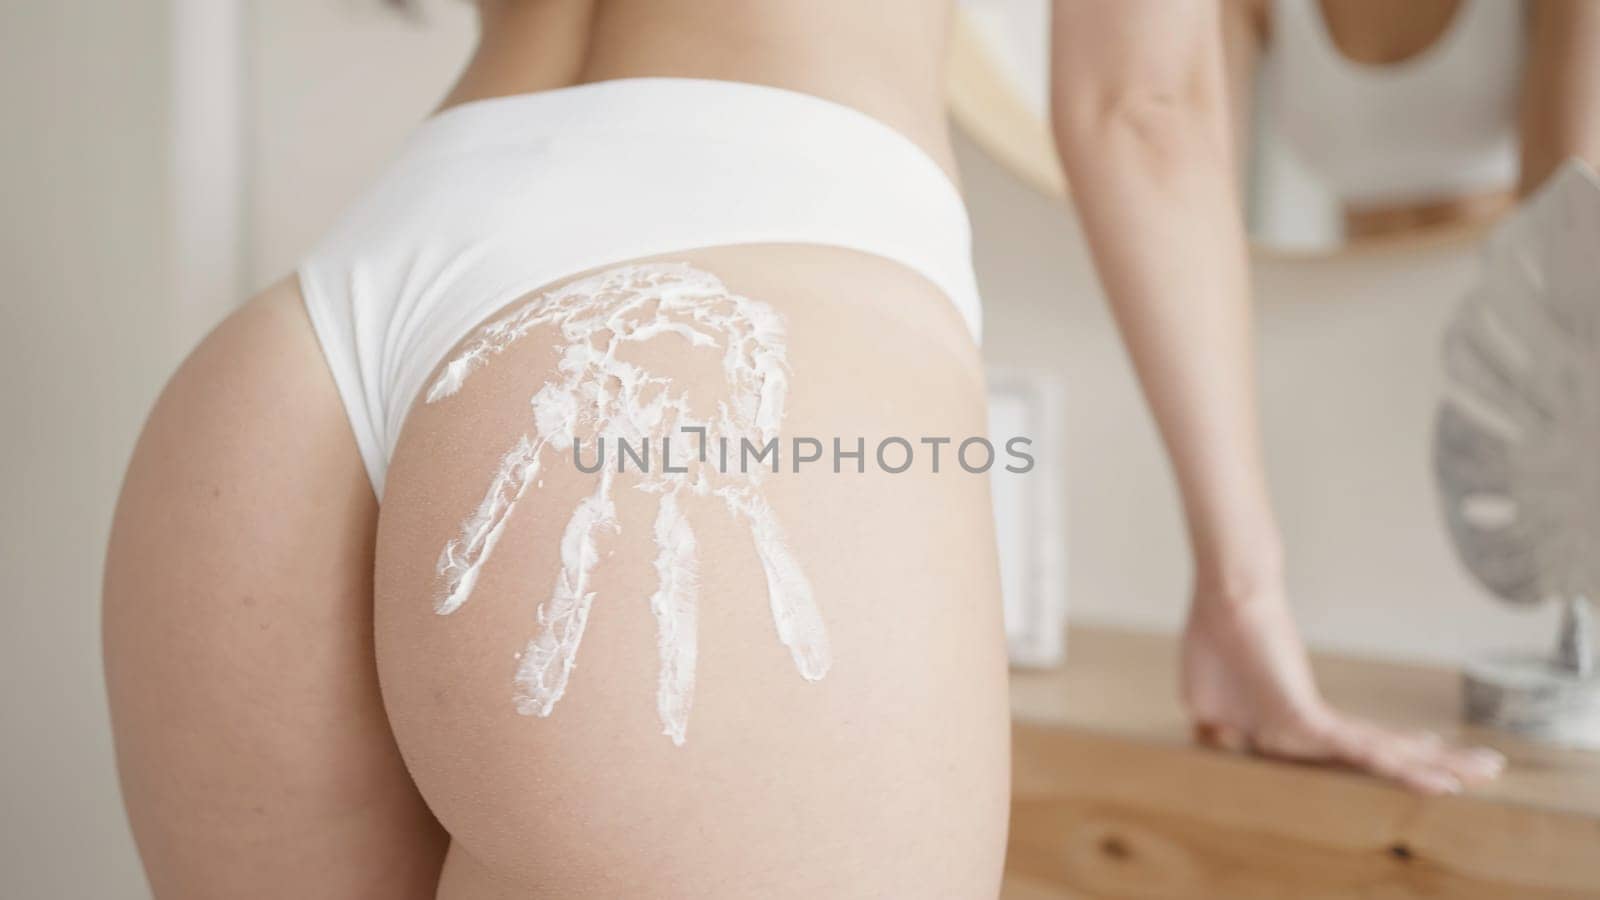 Sexy handprint on woman. Action. Close-up of sexy body of young woman in bright room. Beautiful ass of woman with sexy imprint by Mediawhalestock